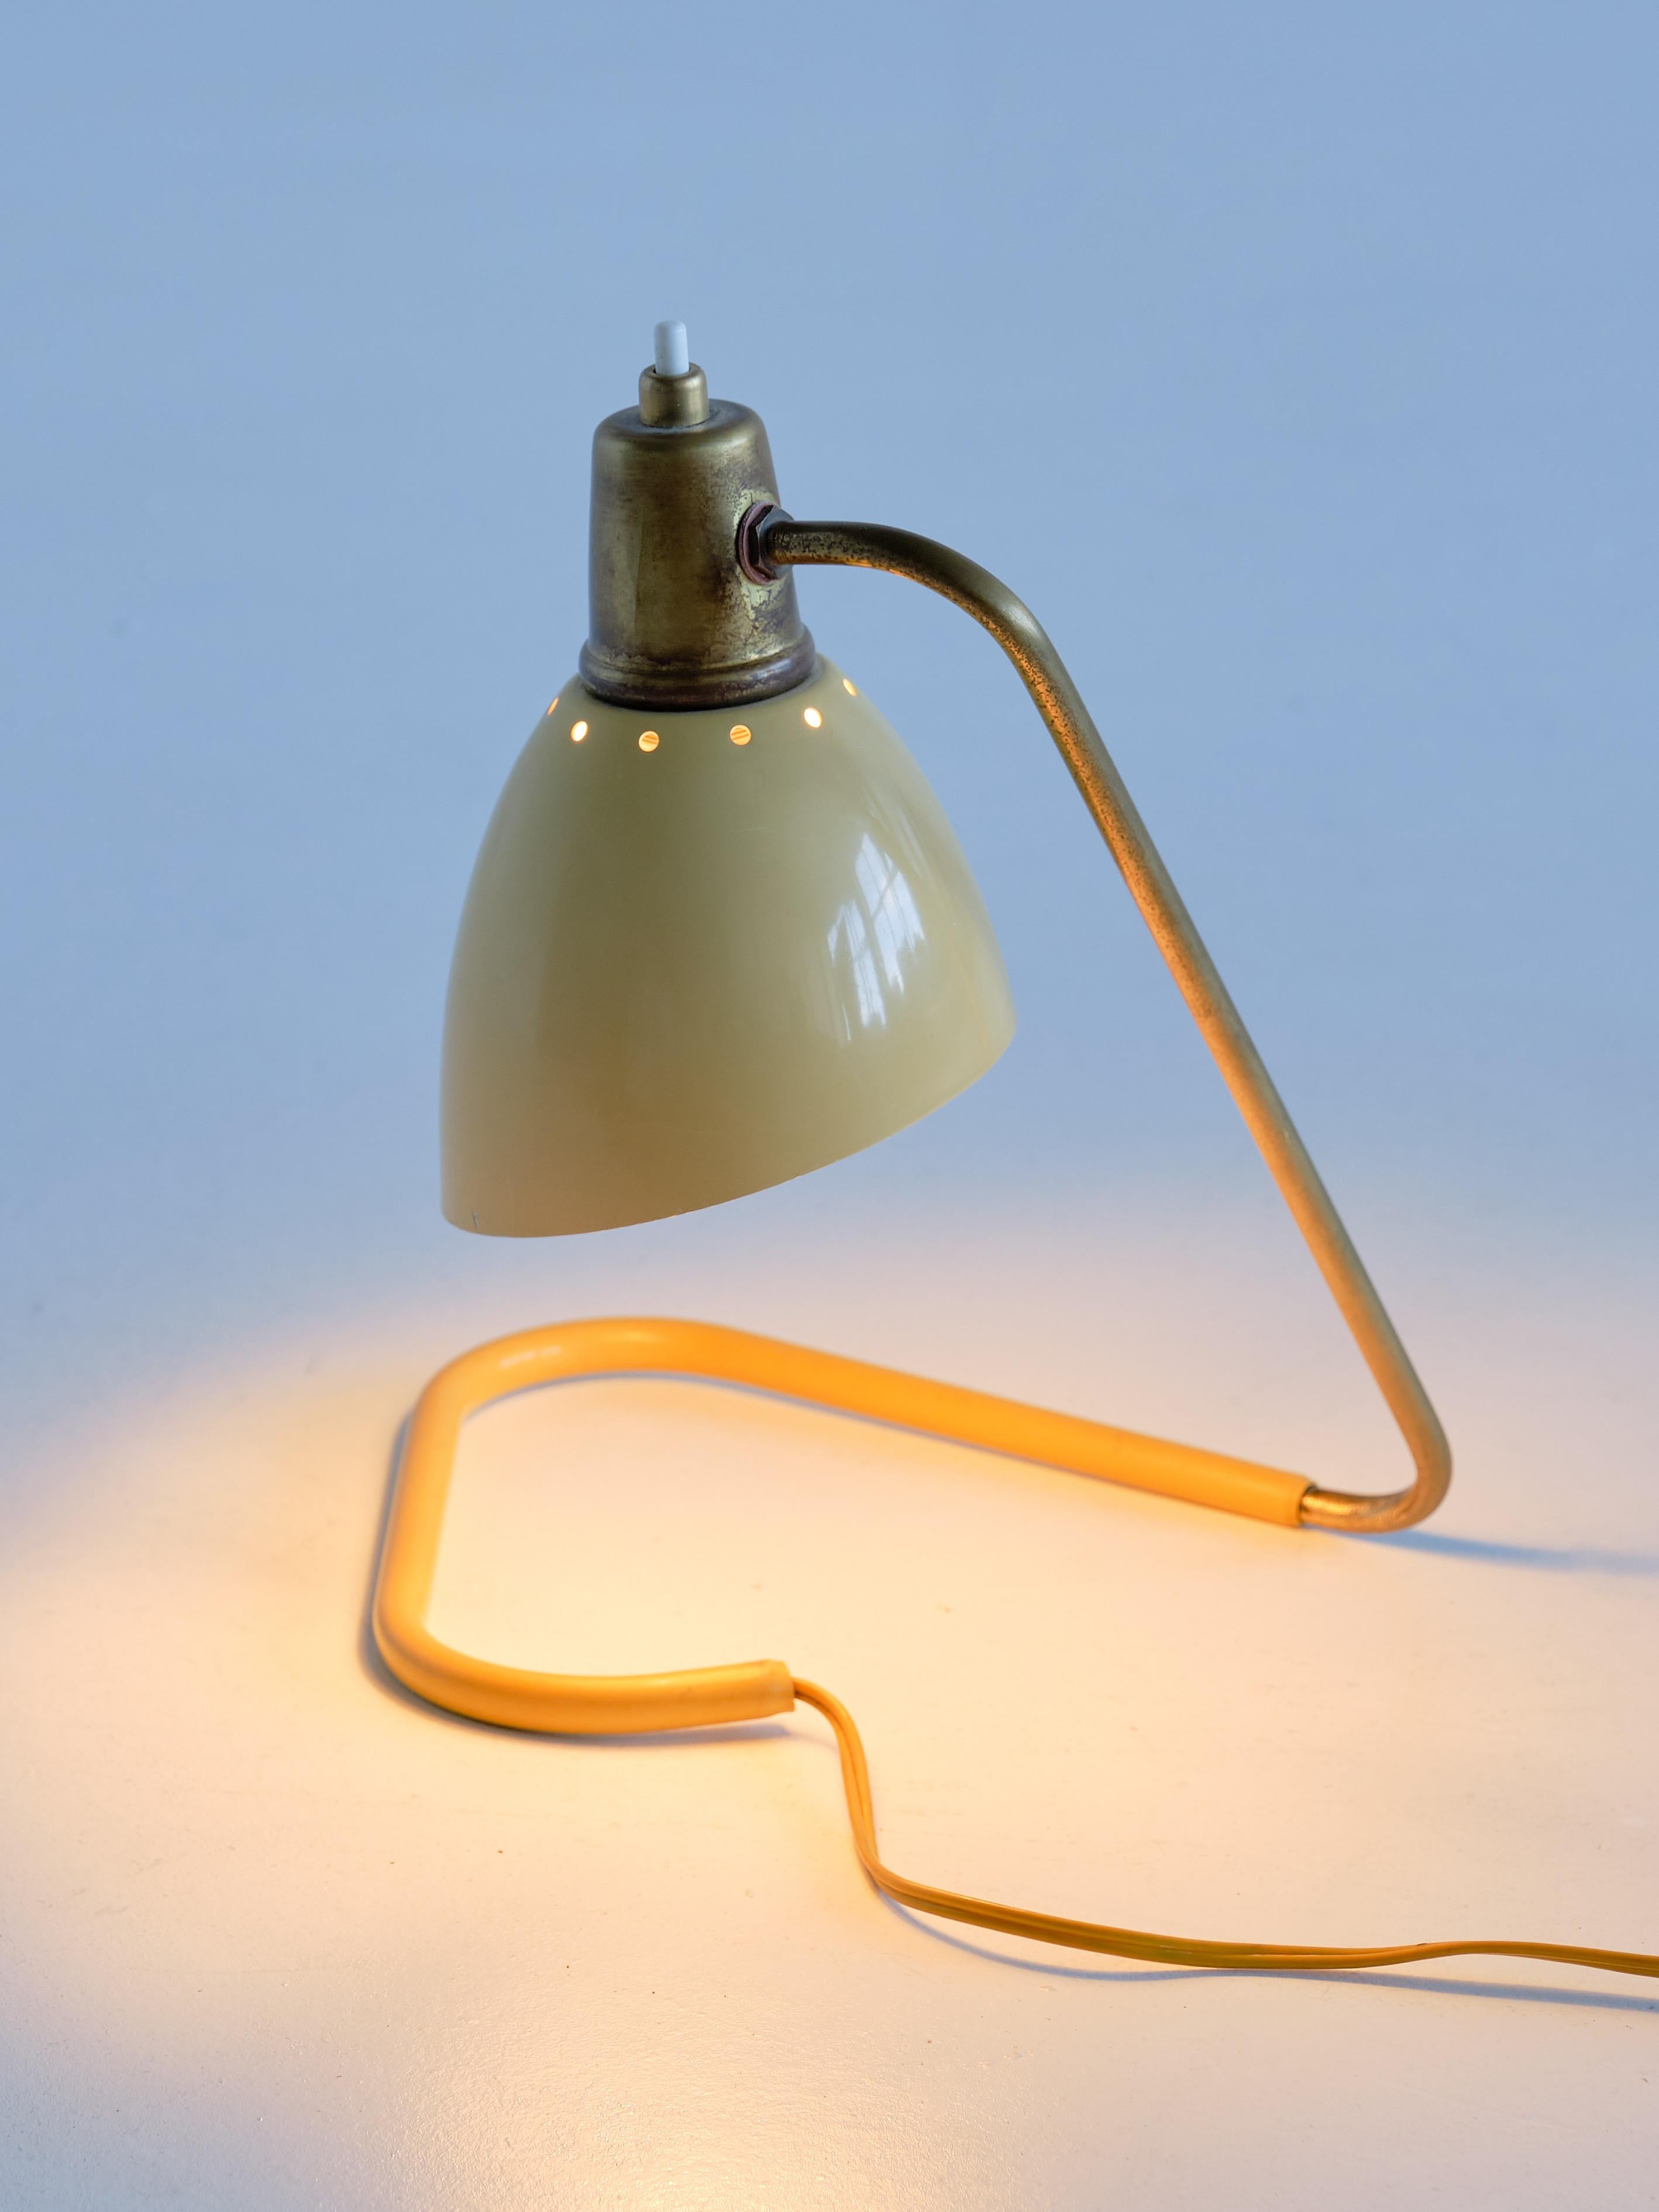 Robert Caillat Table Lamp with Yellow Adjustable Shade, France, 1950s For Sale 4